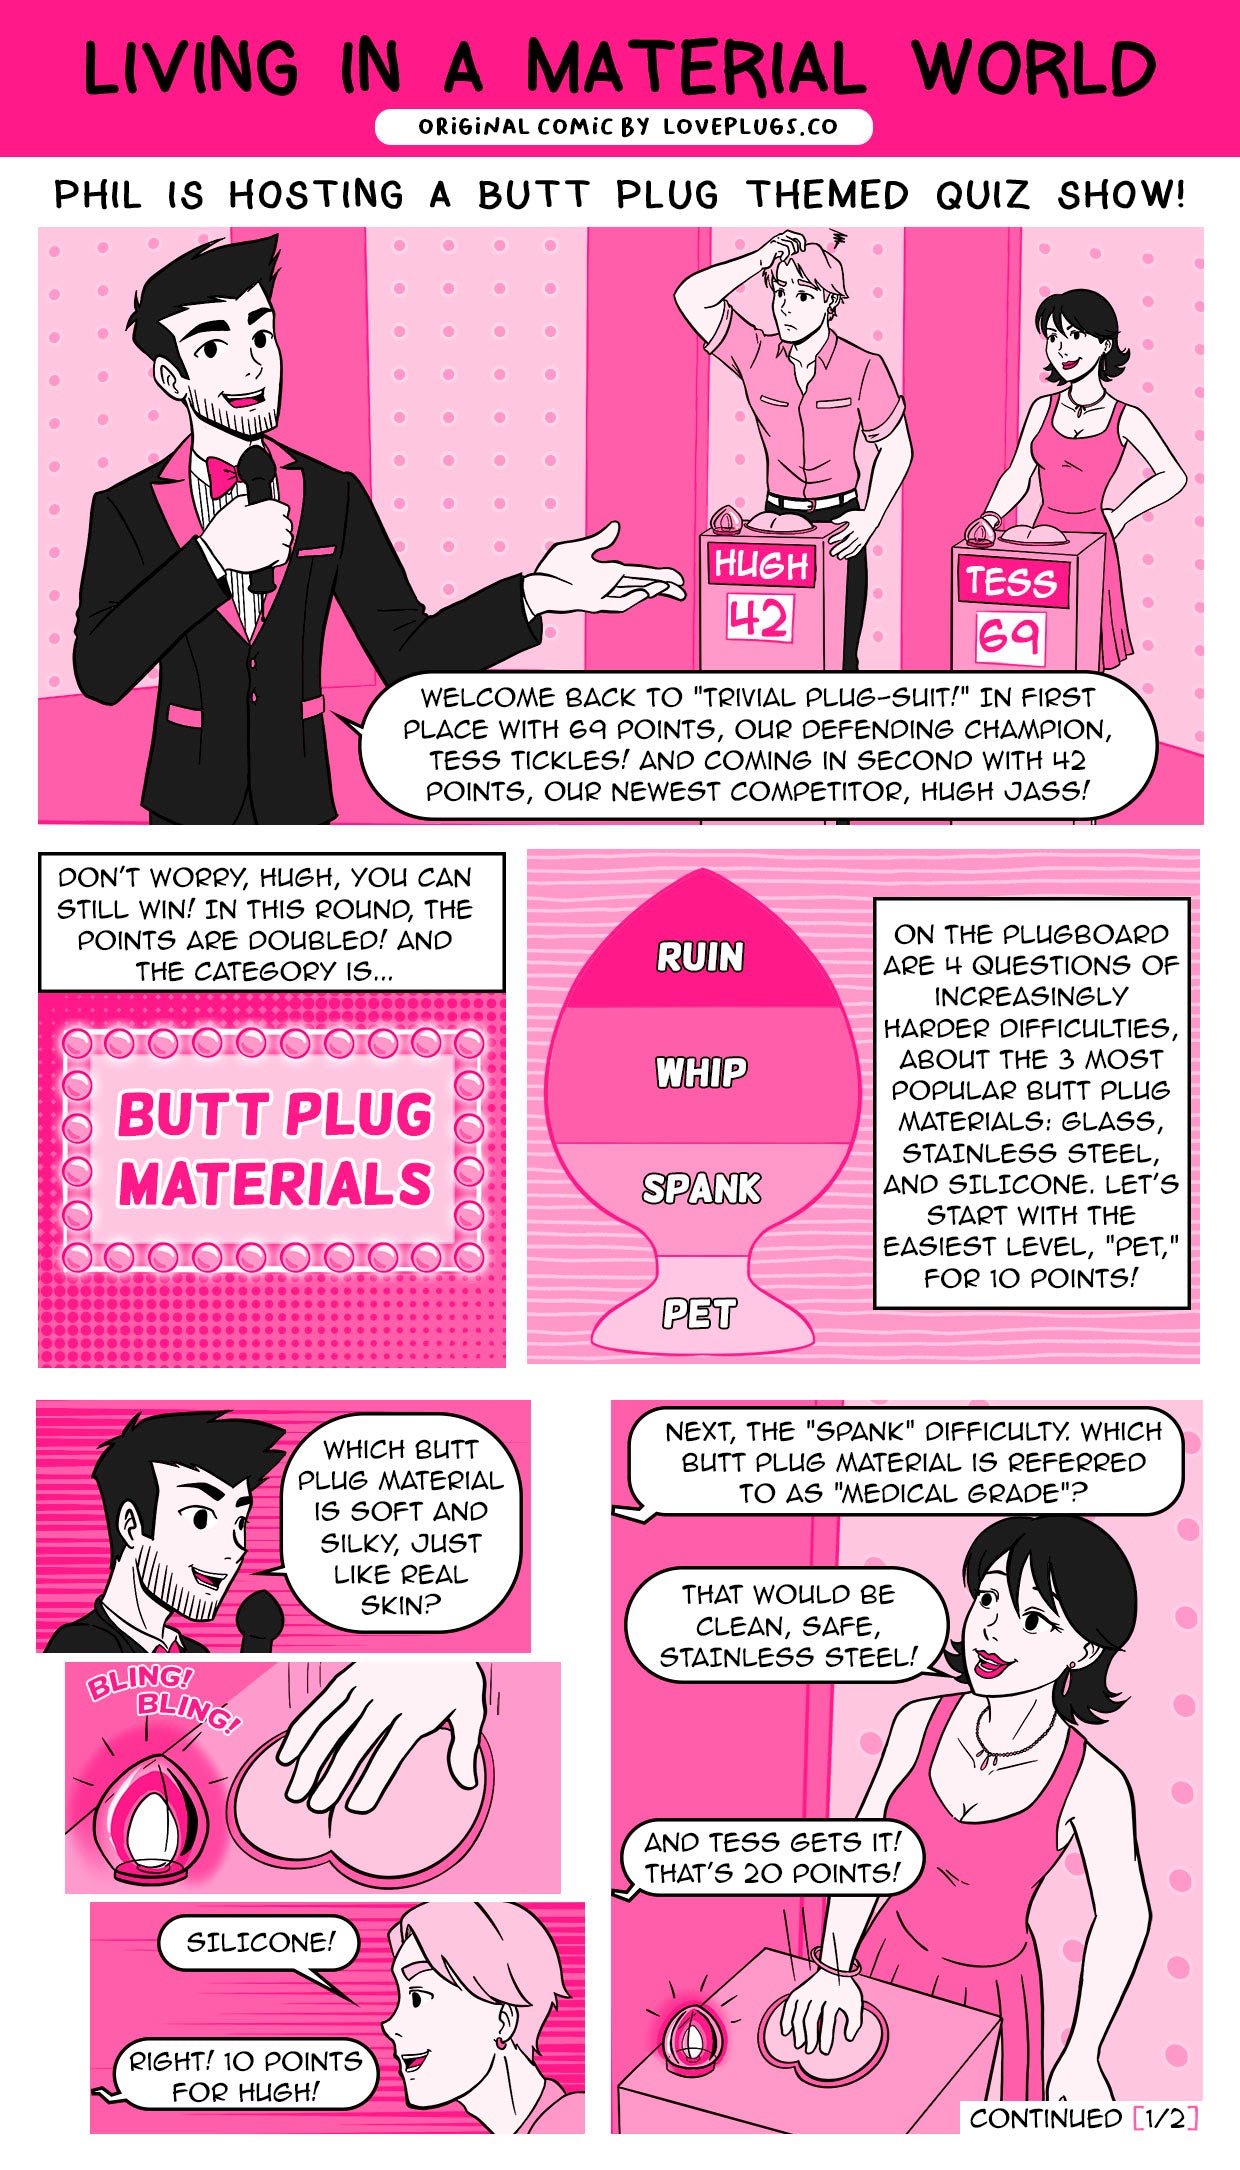 How to Clean Your Butt Plug